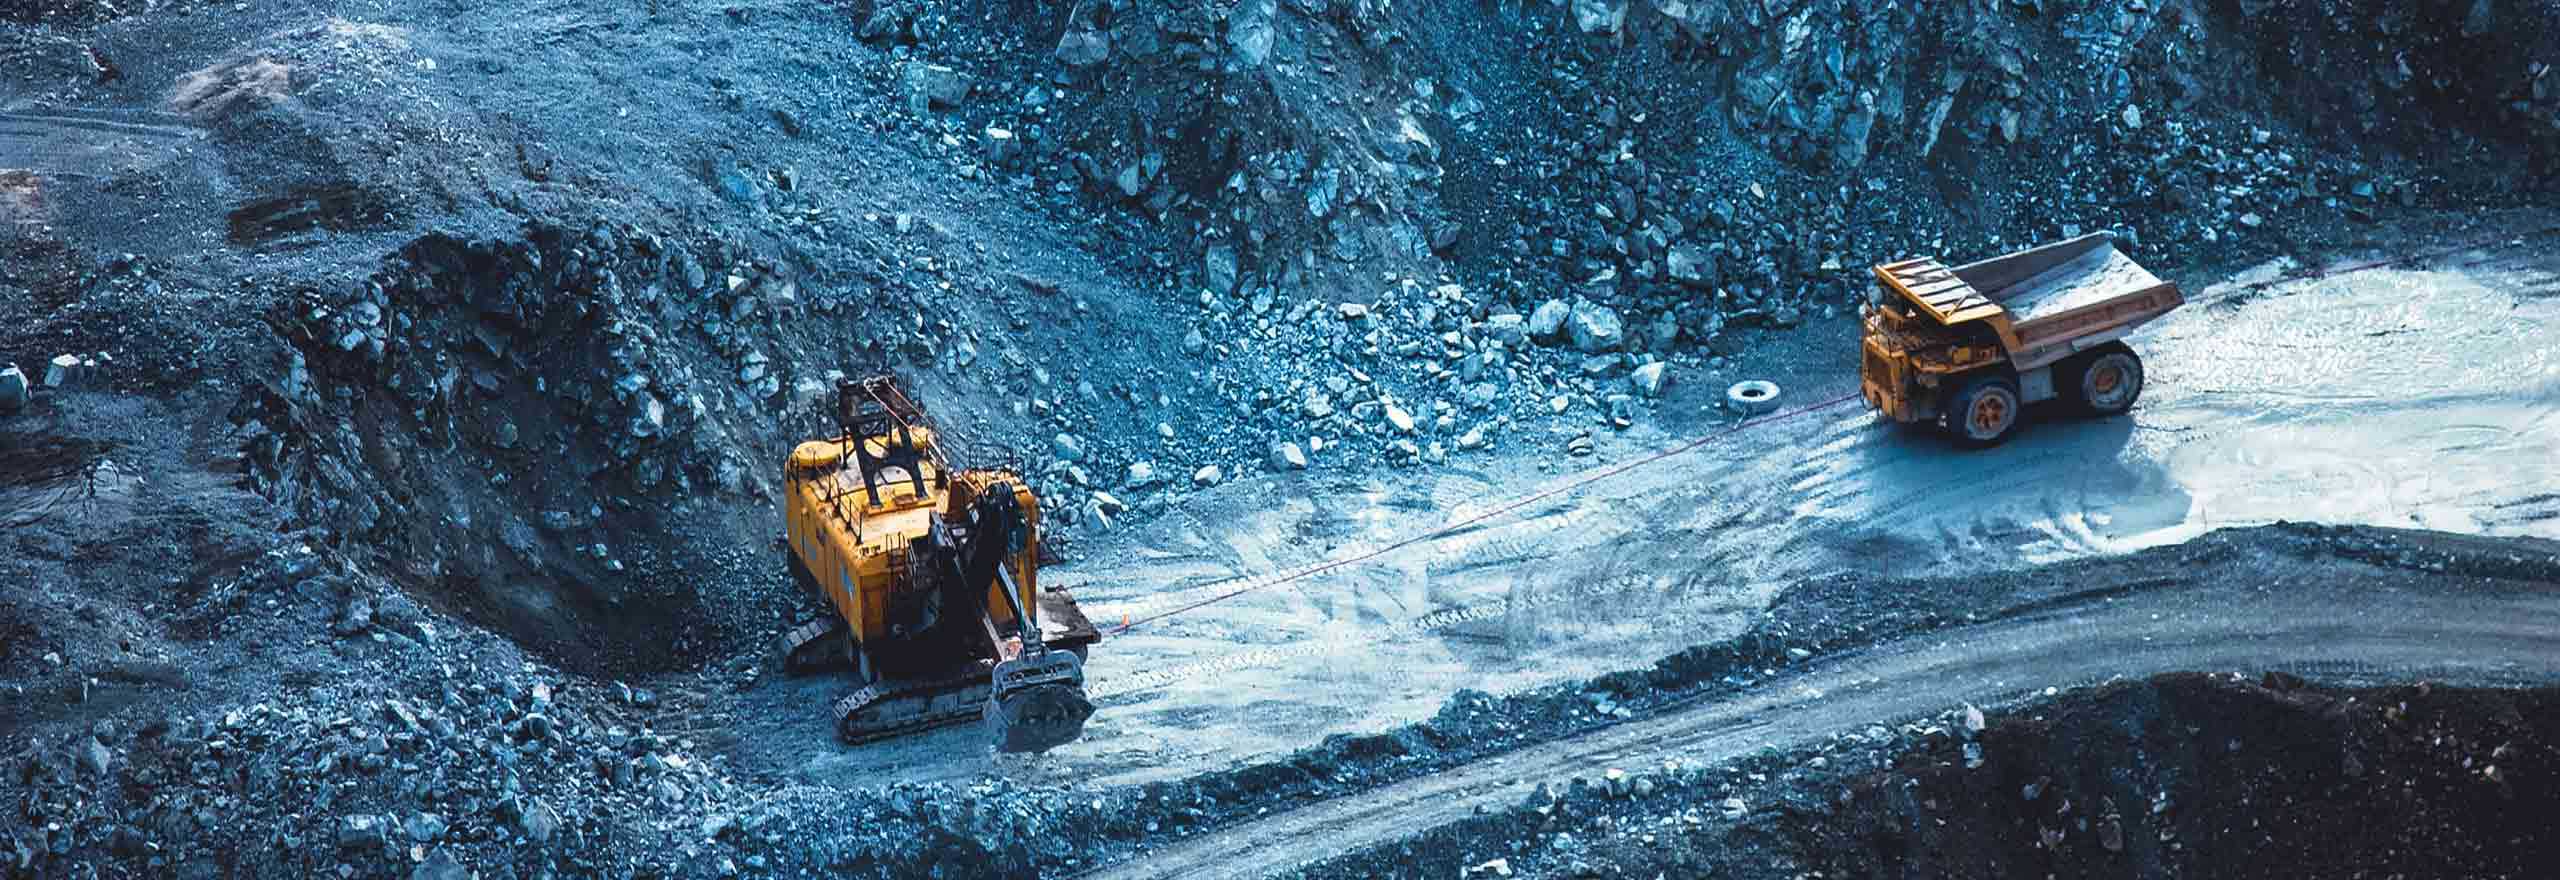 Mine personnel and equipment safety | Hexagon